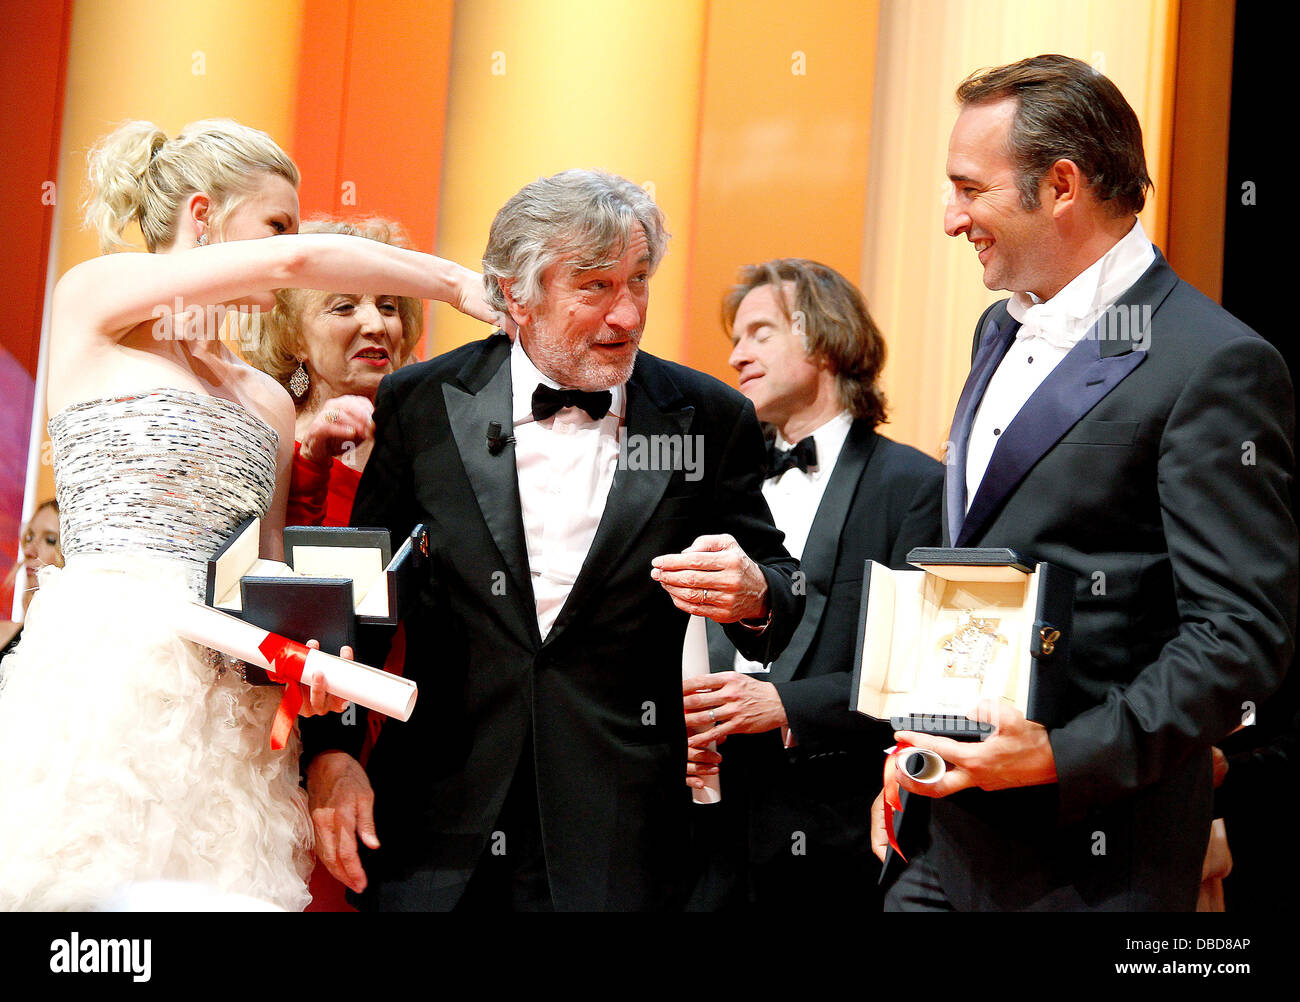 Best Actress Kirsten Dunst, jury member Robert De Niro and Best Actor Jean  Dujardin 2011 Cannes International Film Festival - Closing Ceremony and  Awards - Inside Cannes, France - 22.05.11 Stock Photo - Alamy